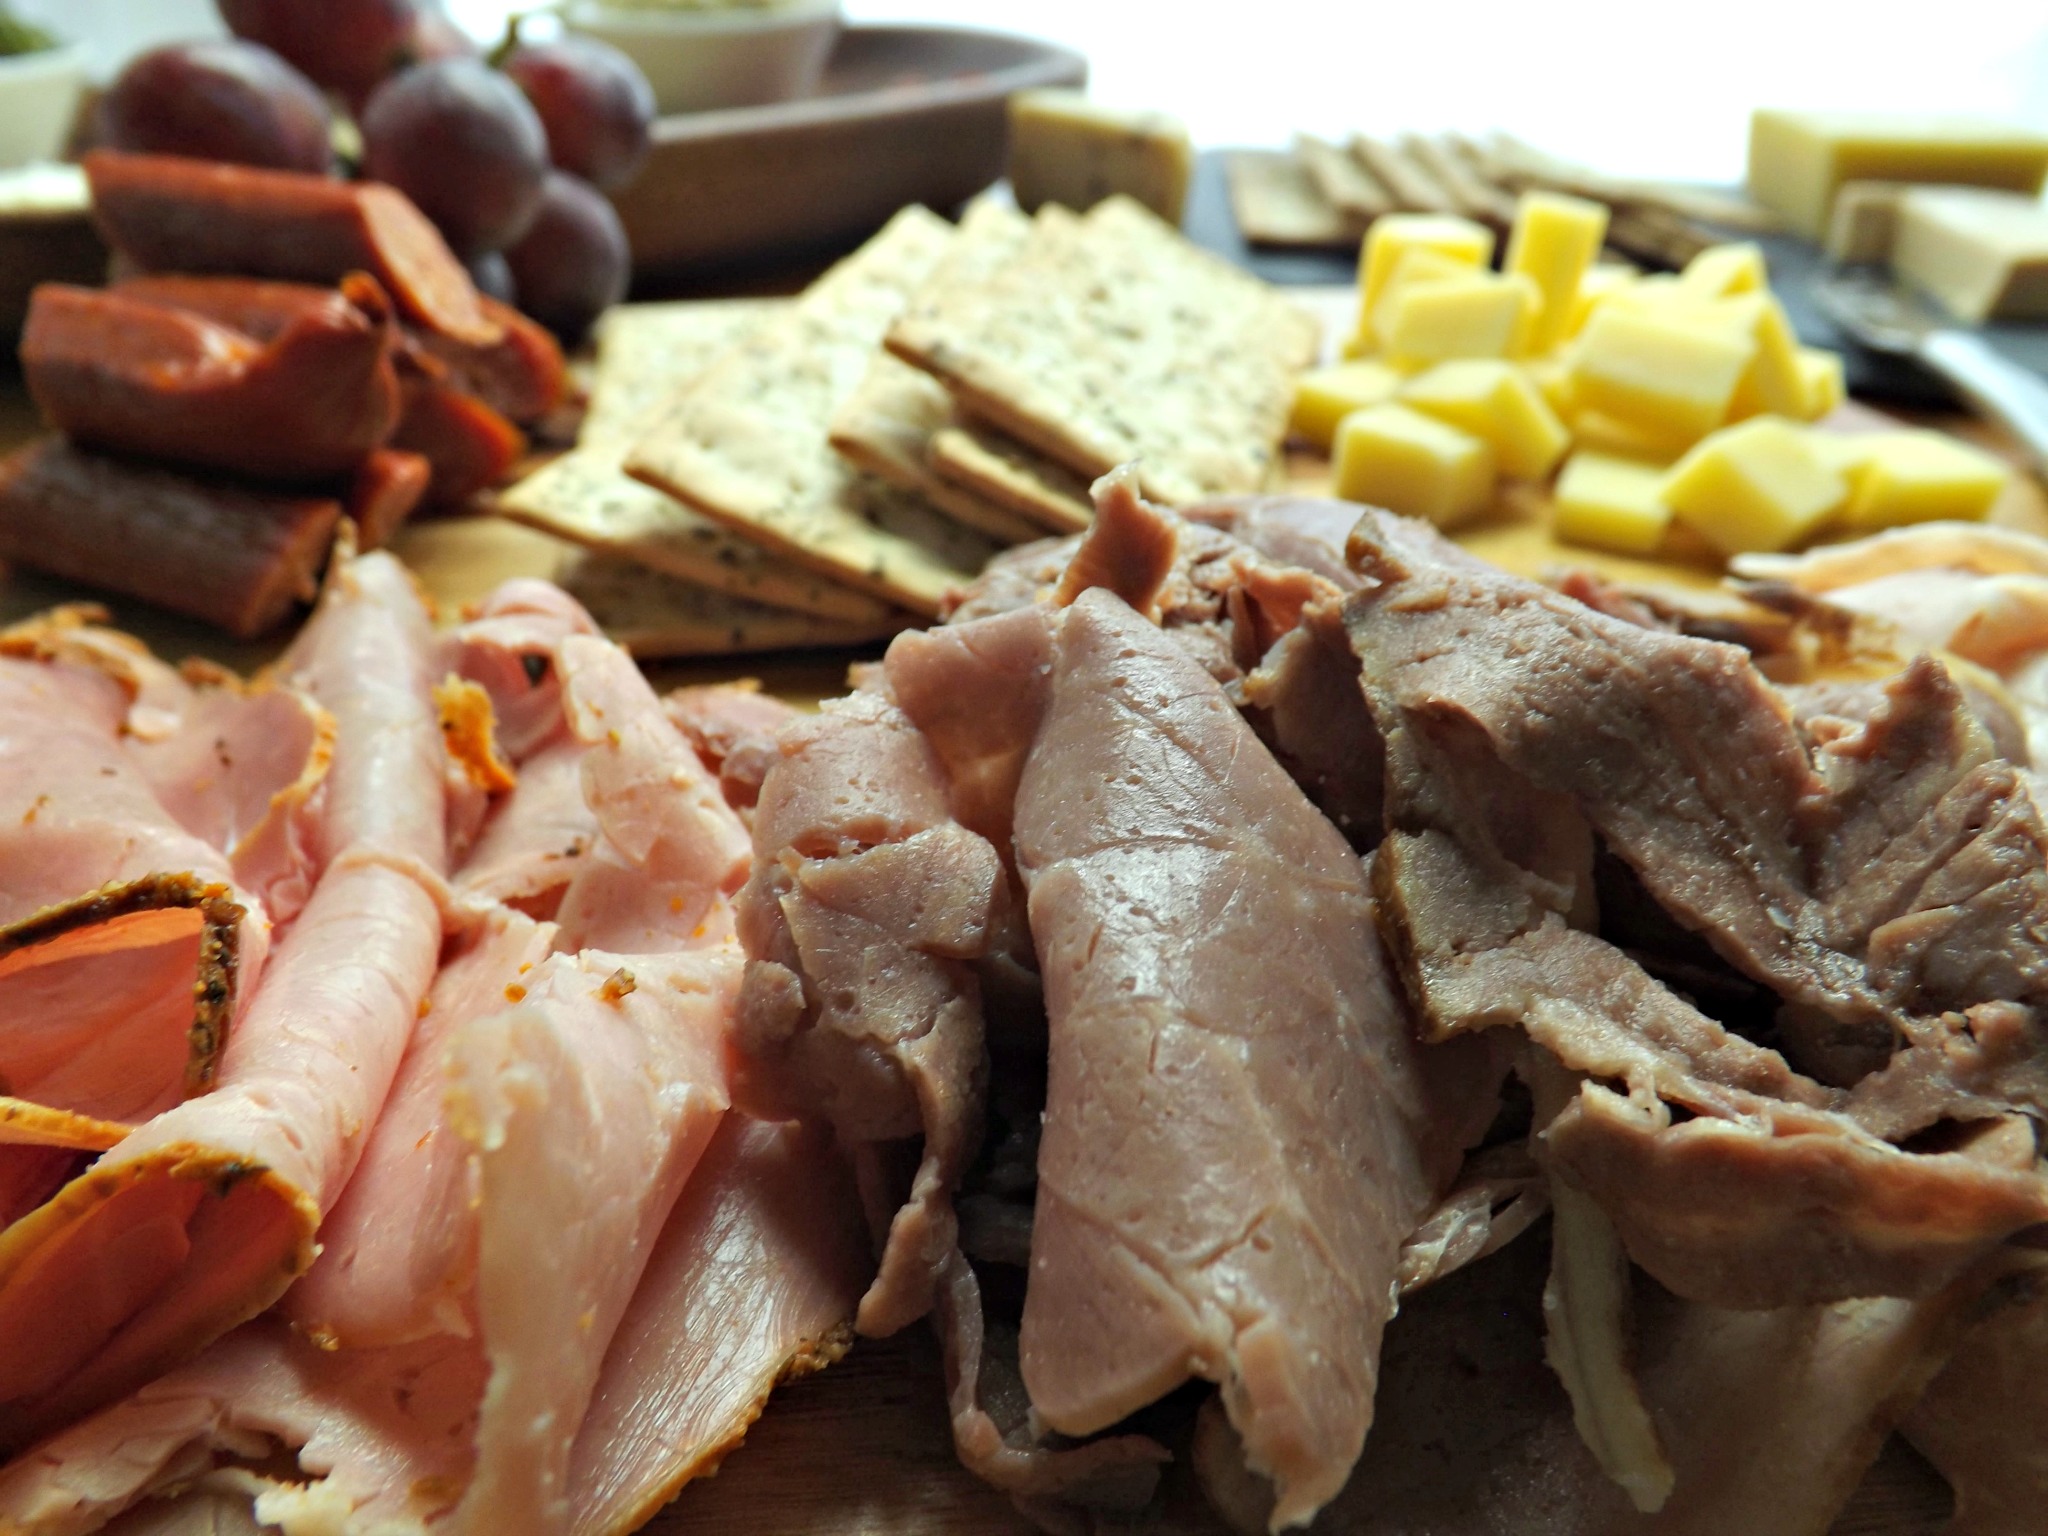 The no fuss way to feed a crowd, with out the stress! Platters